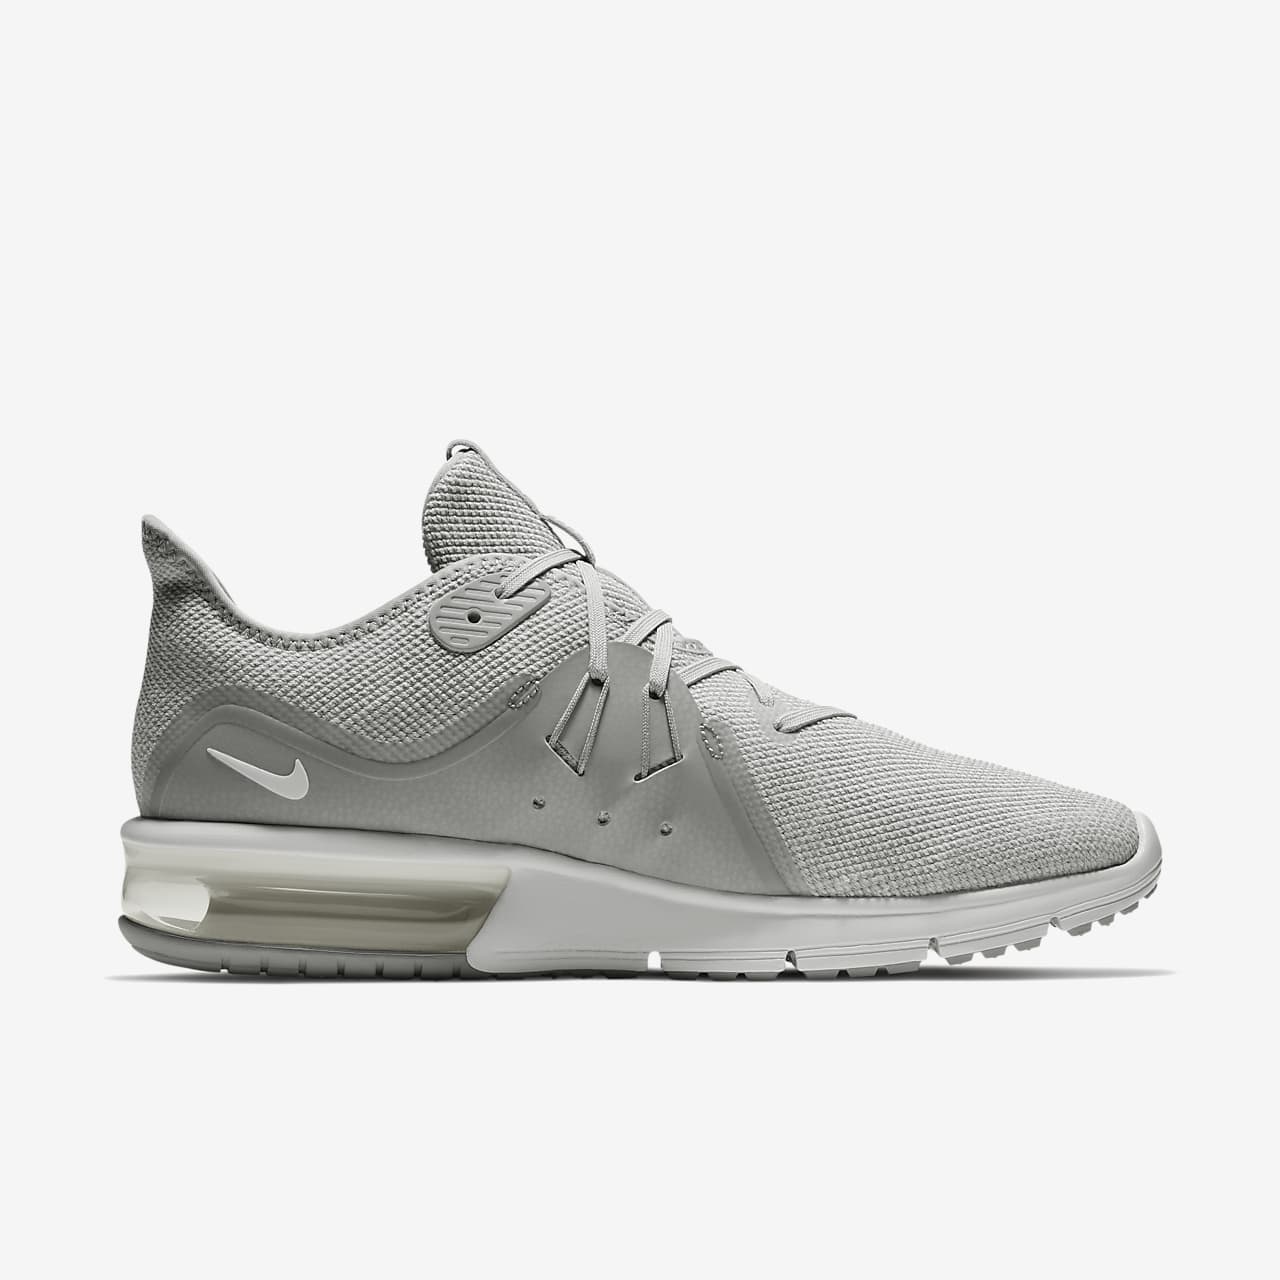 nike men air max sequent running shoes